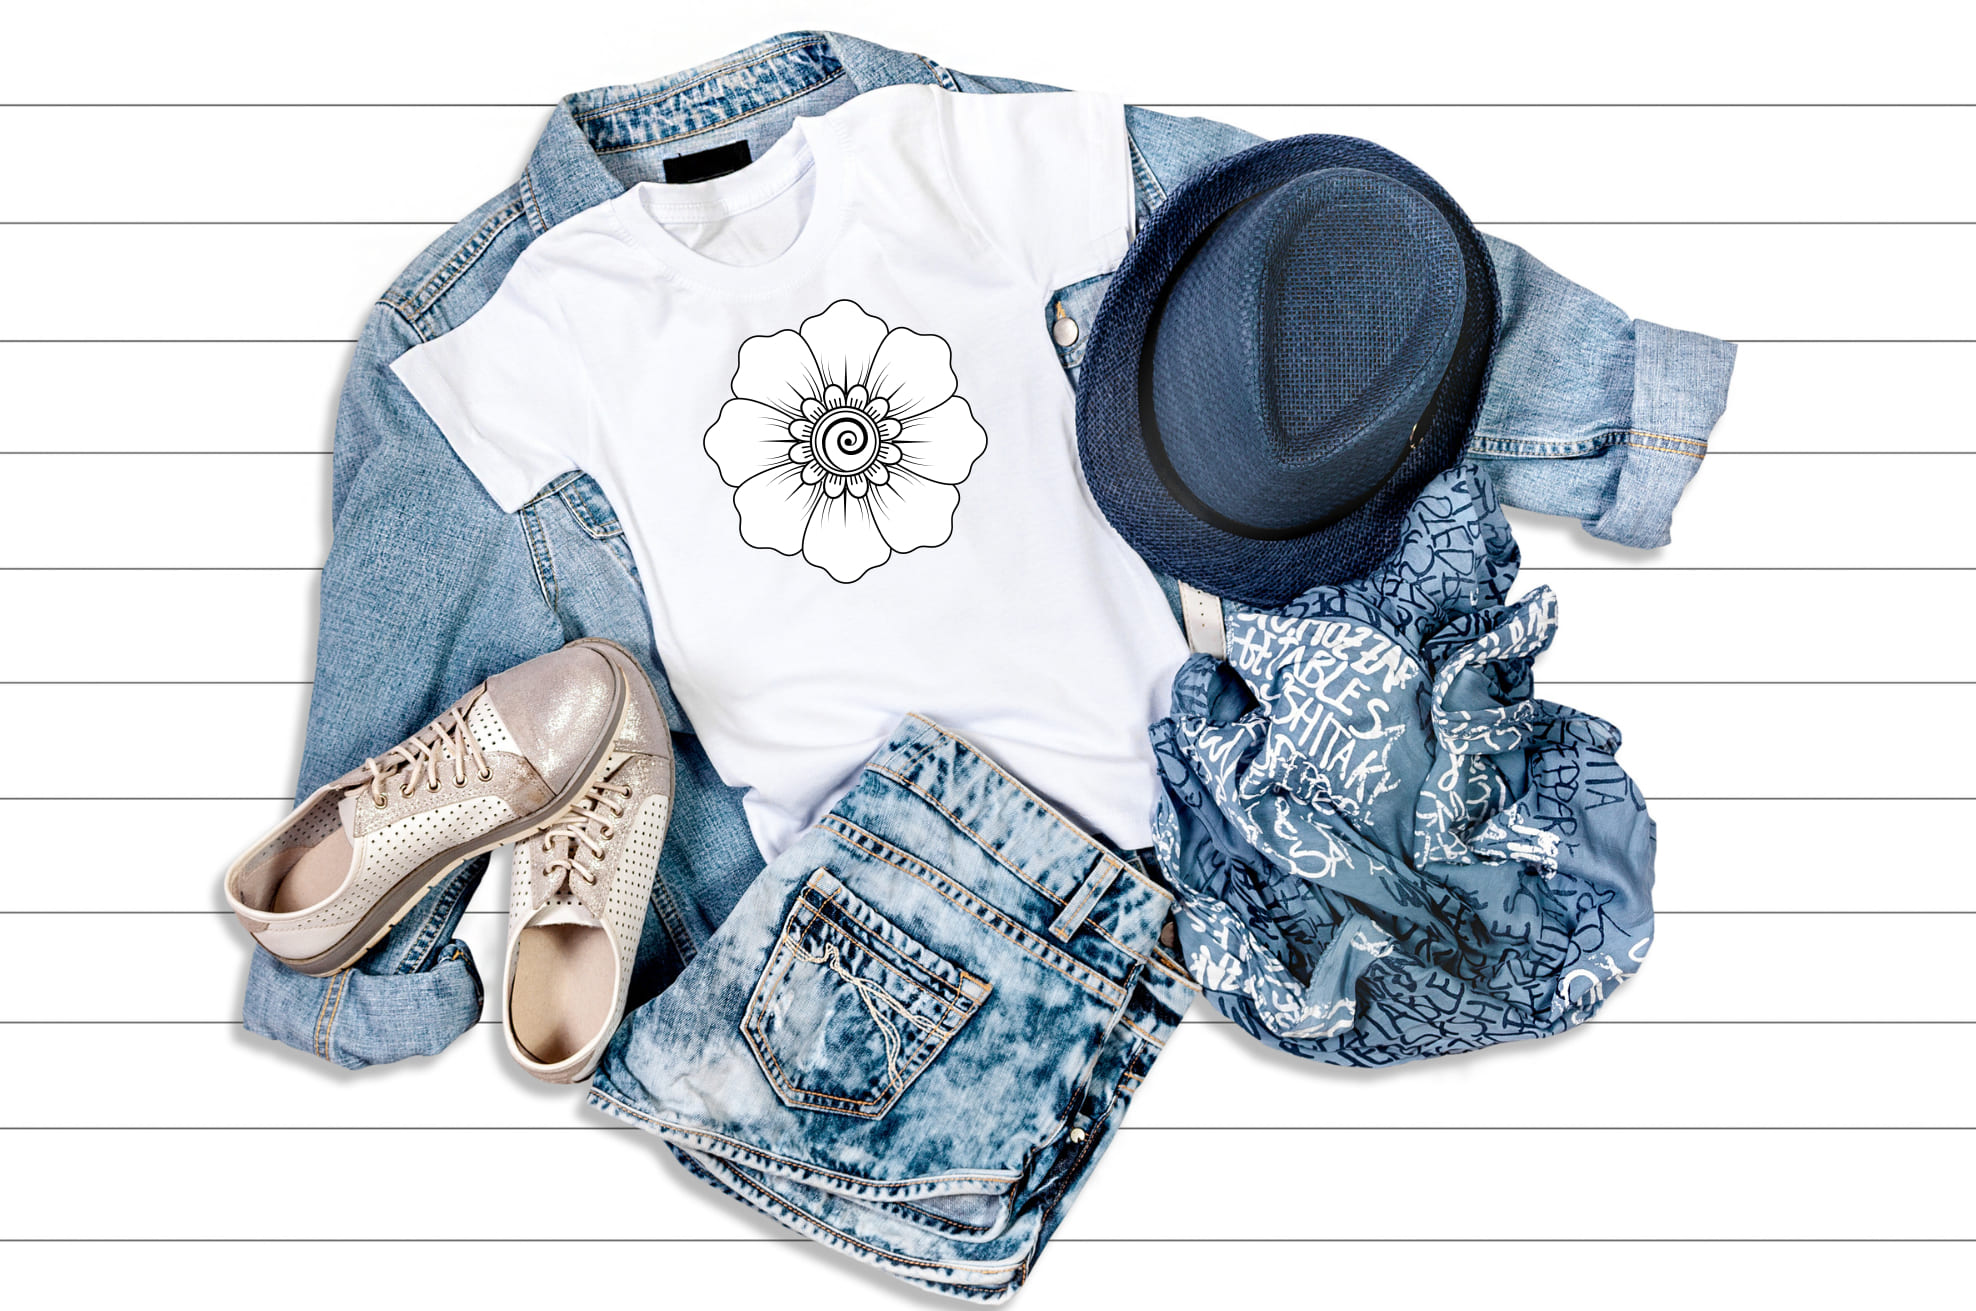 Jeans look with the white t-shirt with a mandala designs.